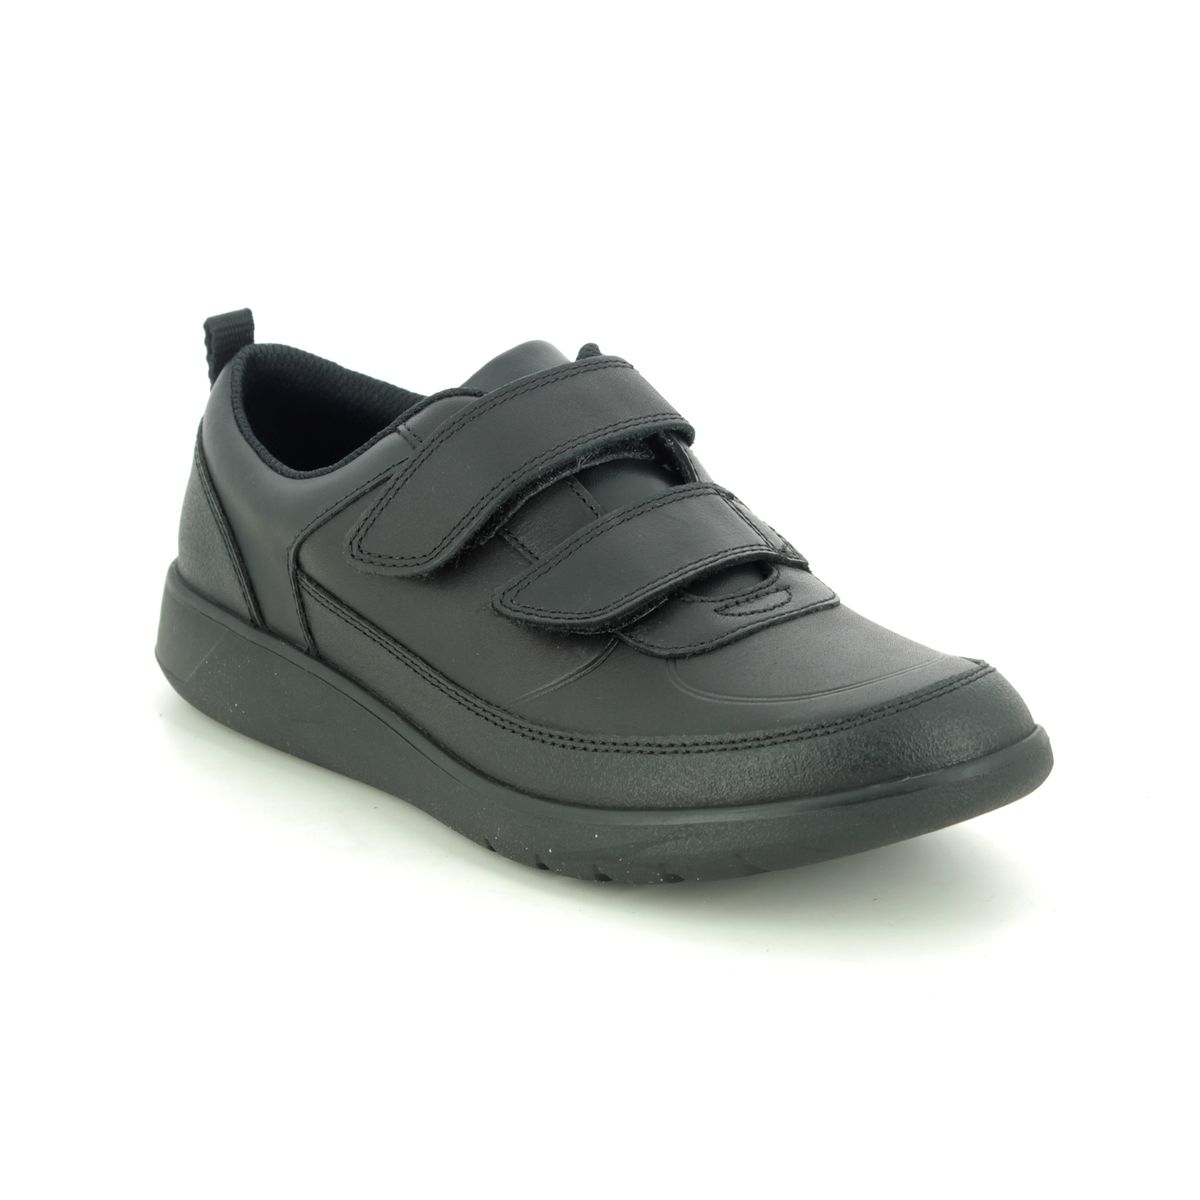 Clarks Scape Flare Y Black Leather Kids Boys Shoes 494096F In Size 4.5 In Plain Black Leather F Width Fitting Regular Fit For School For kids